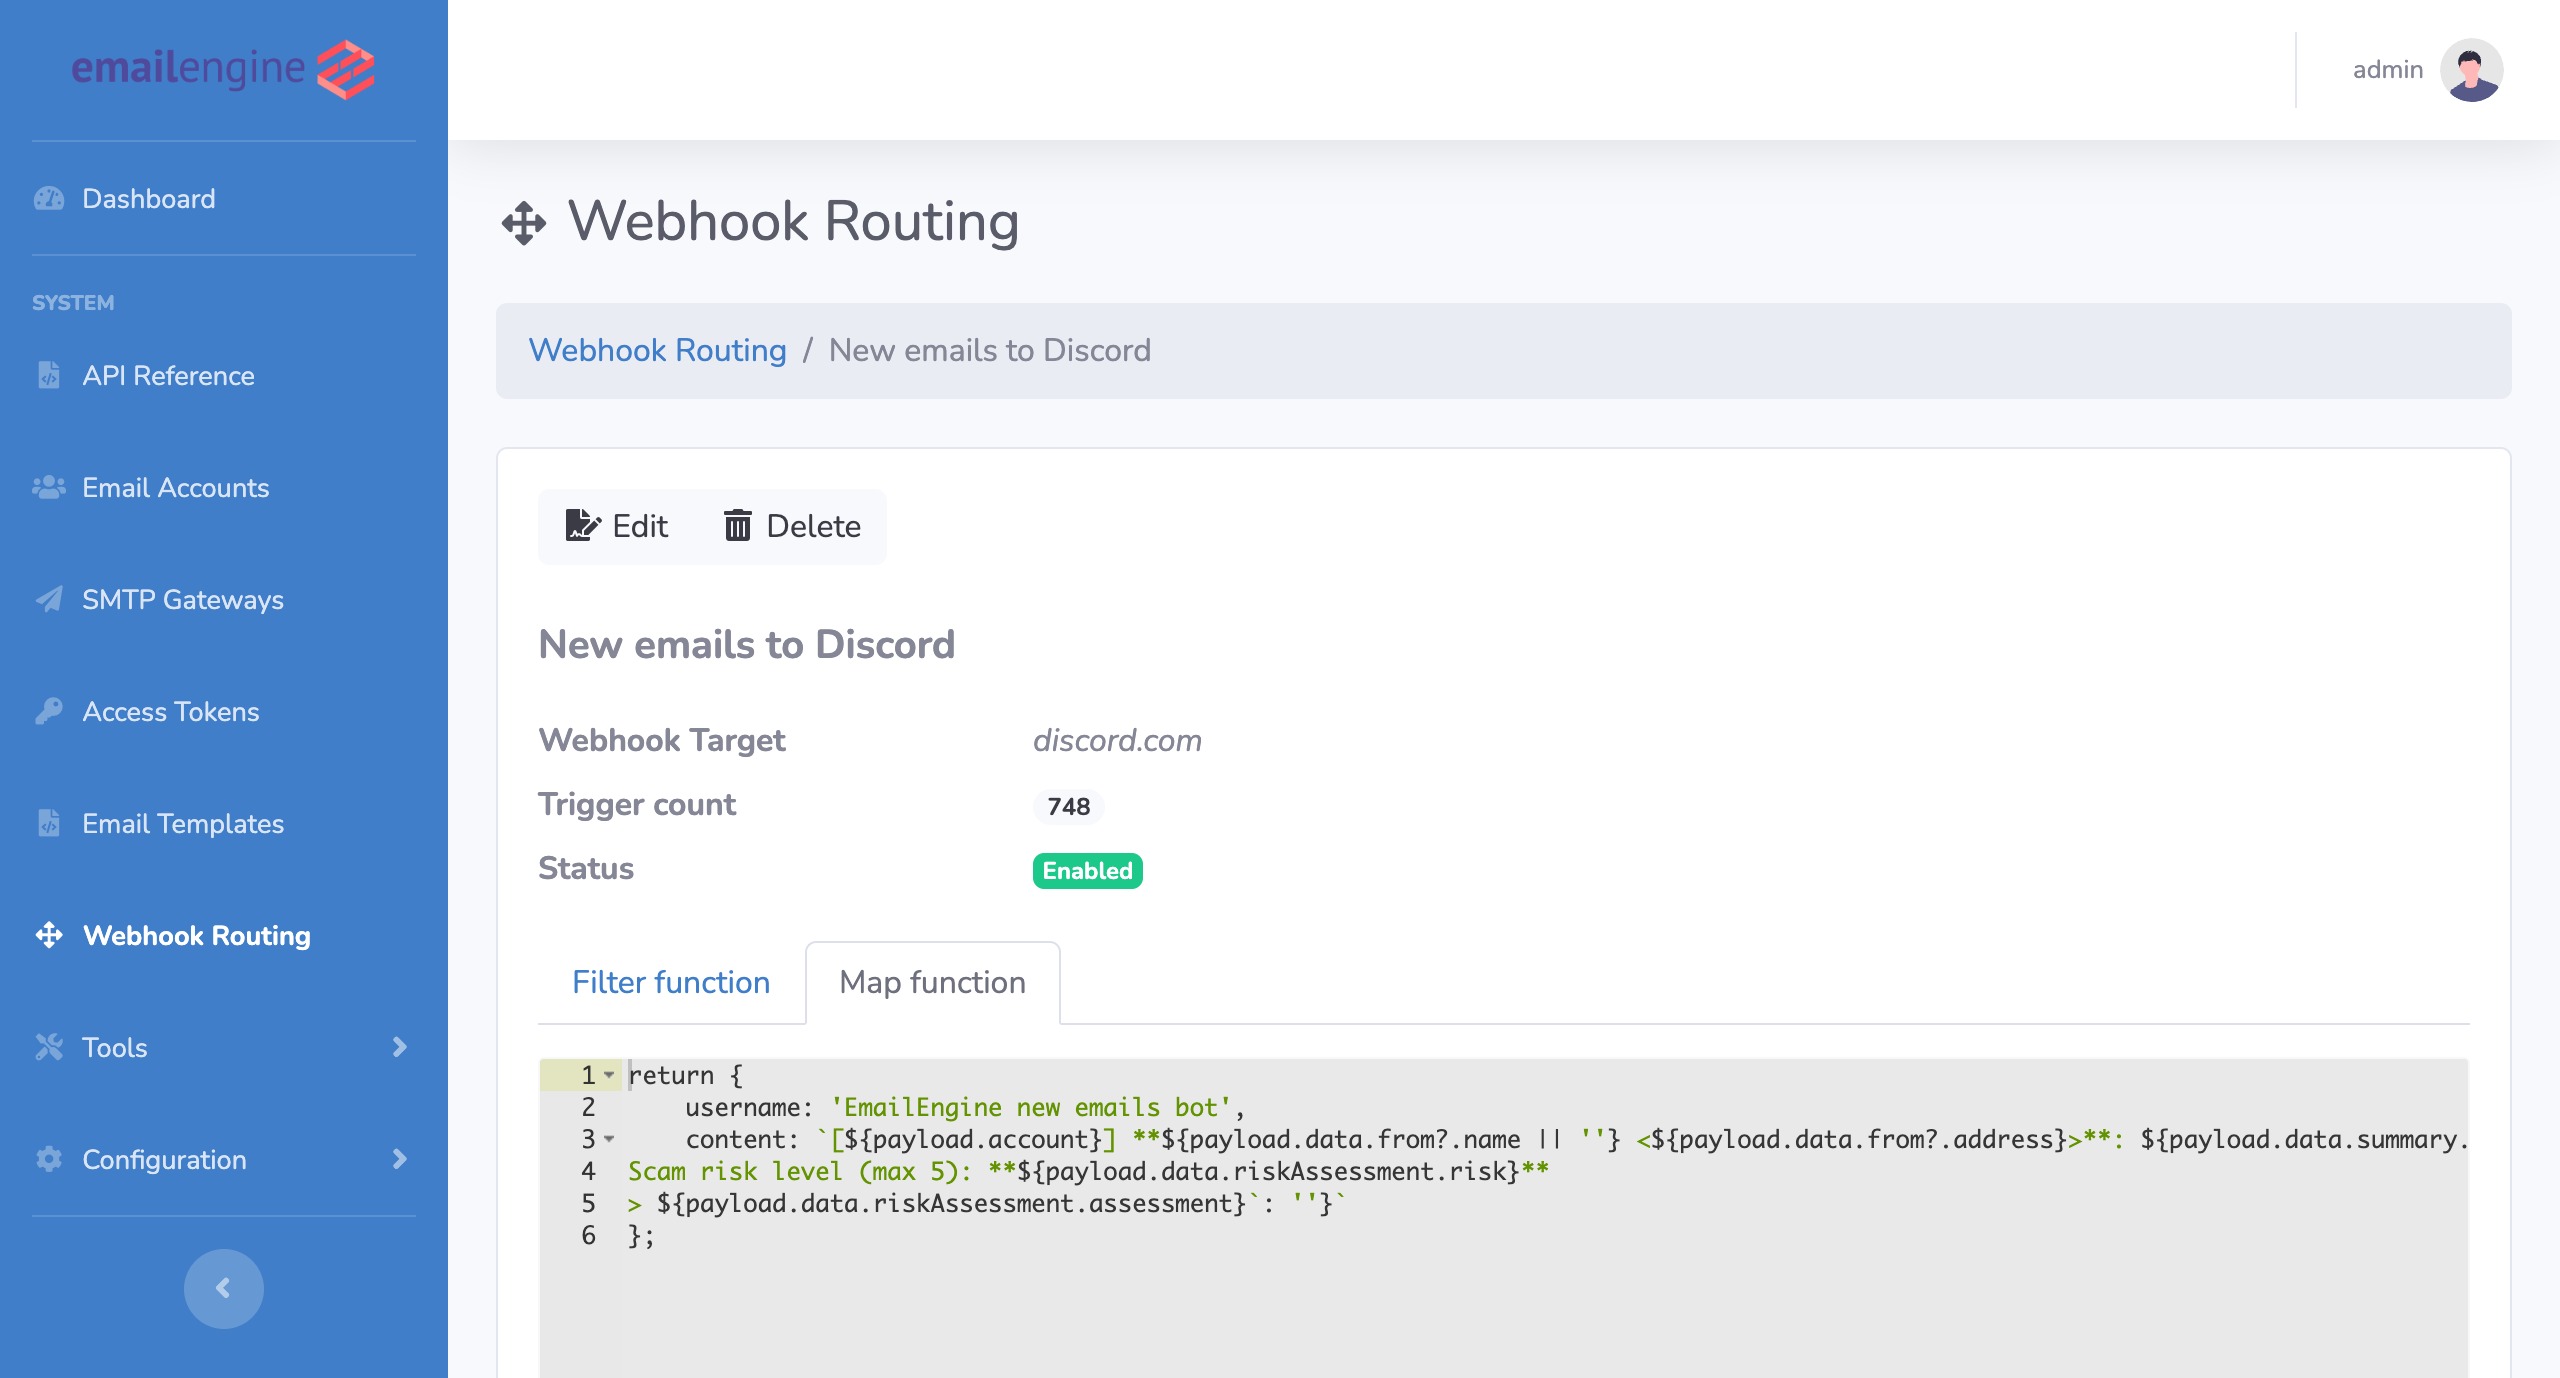 Low-code tooling to send custom webhooks to any other application